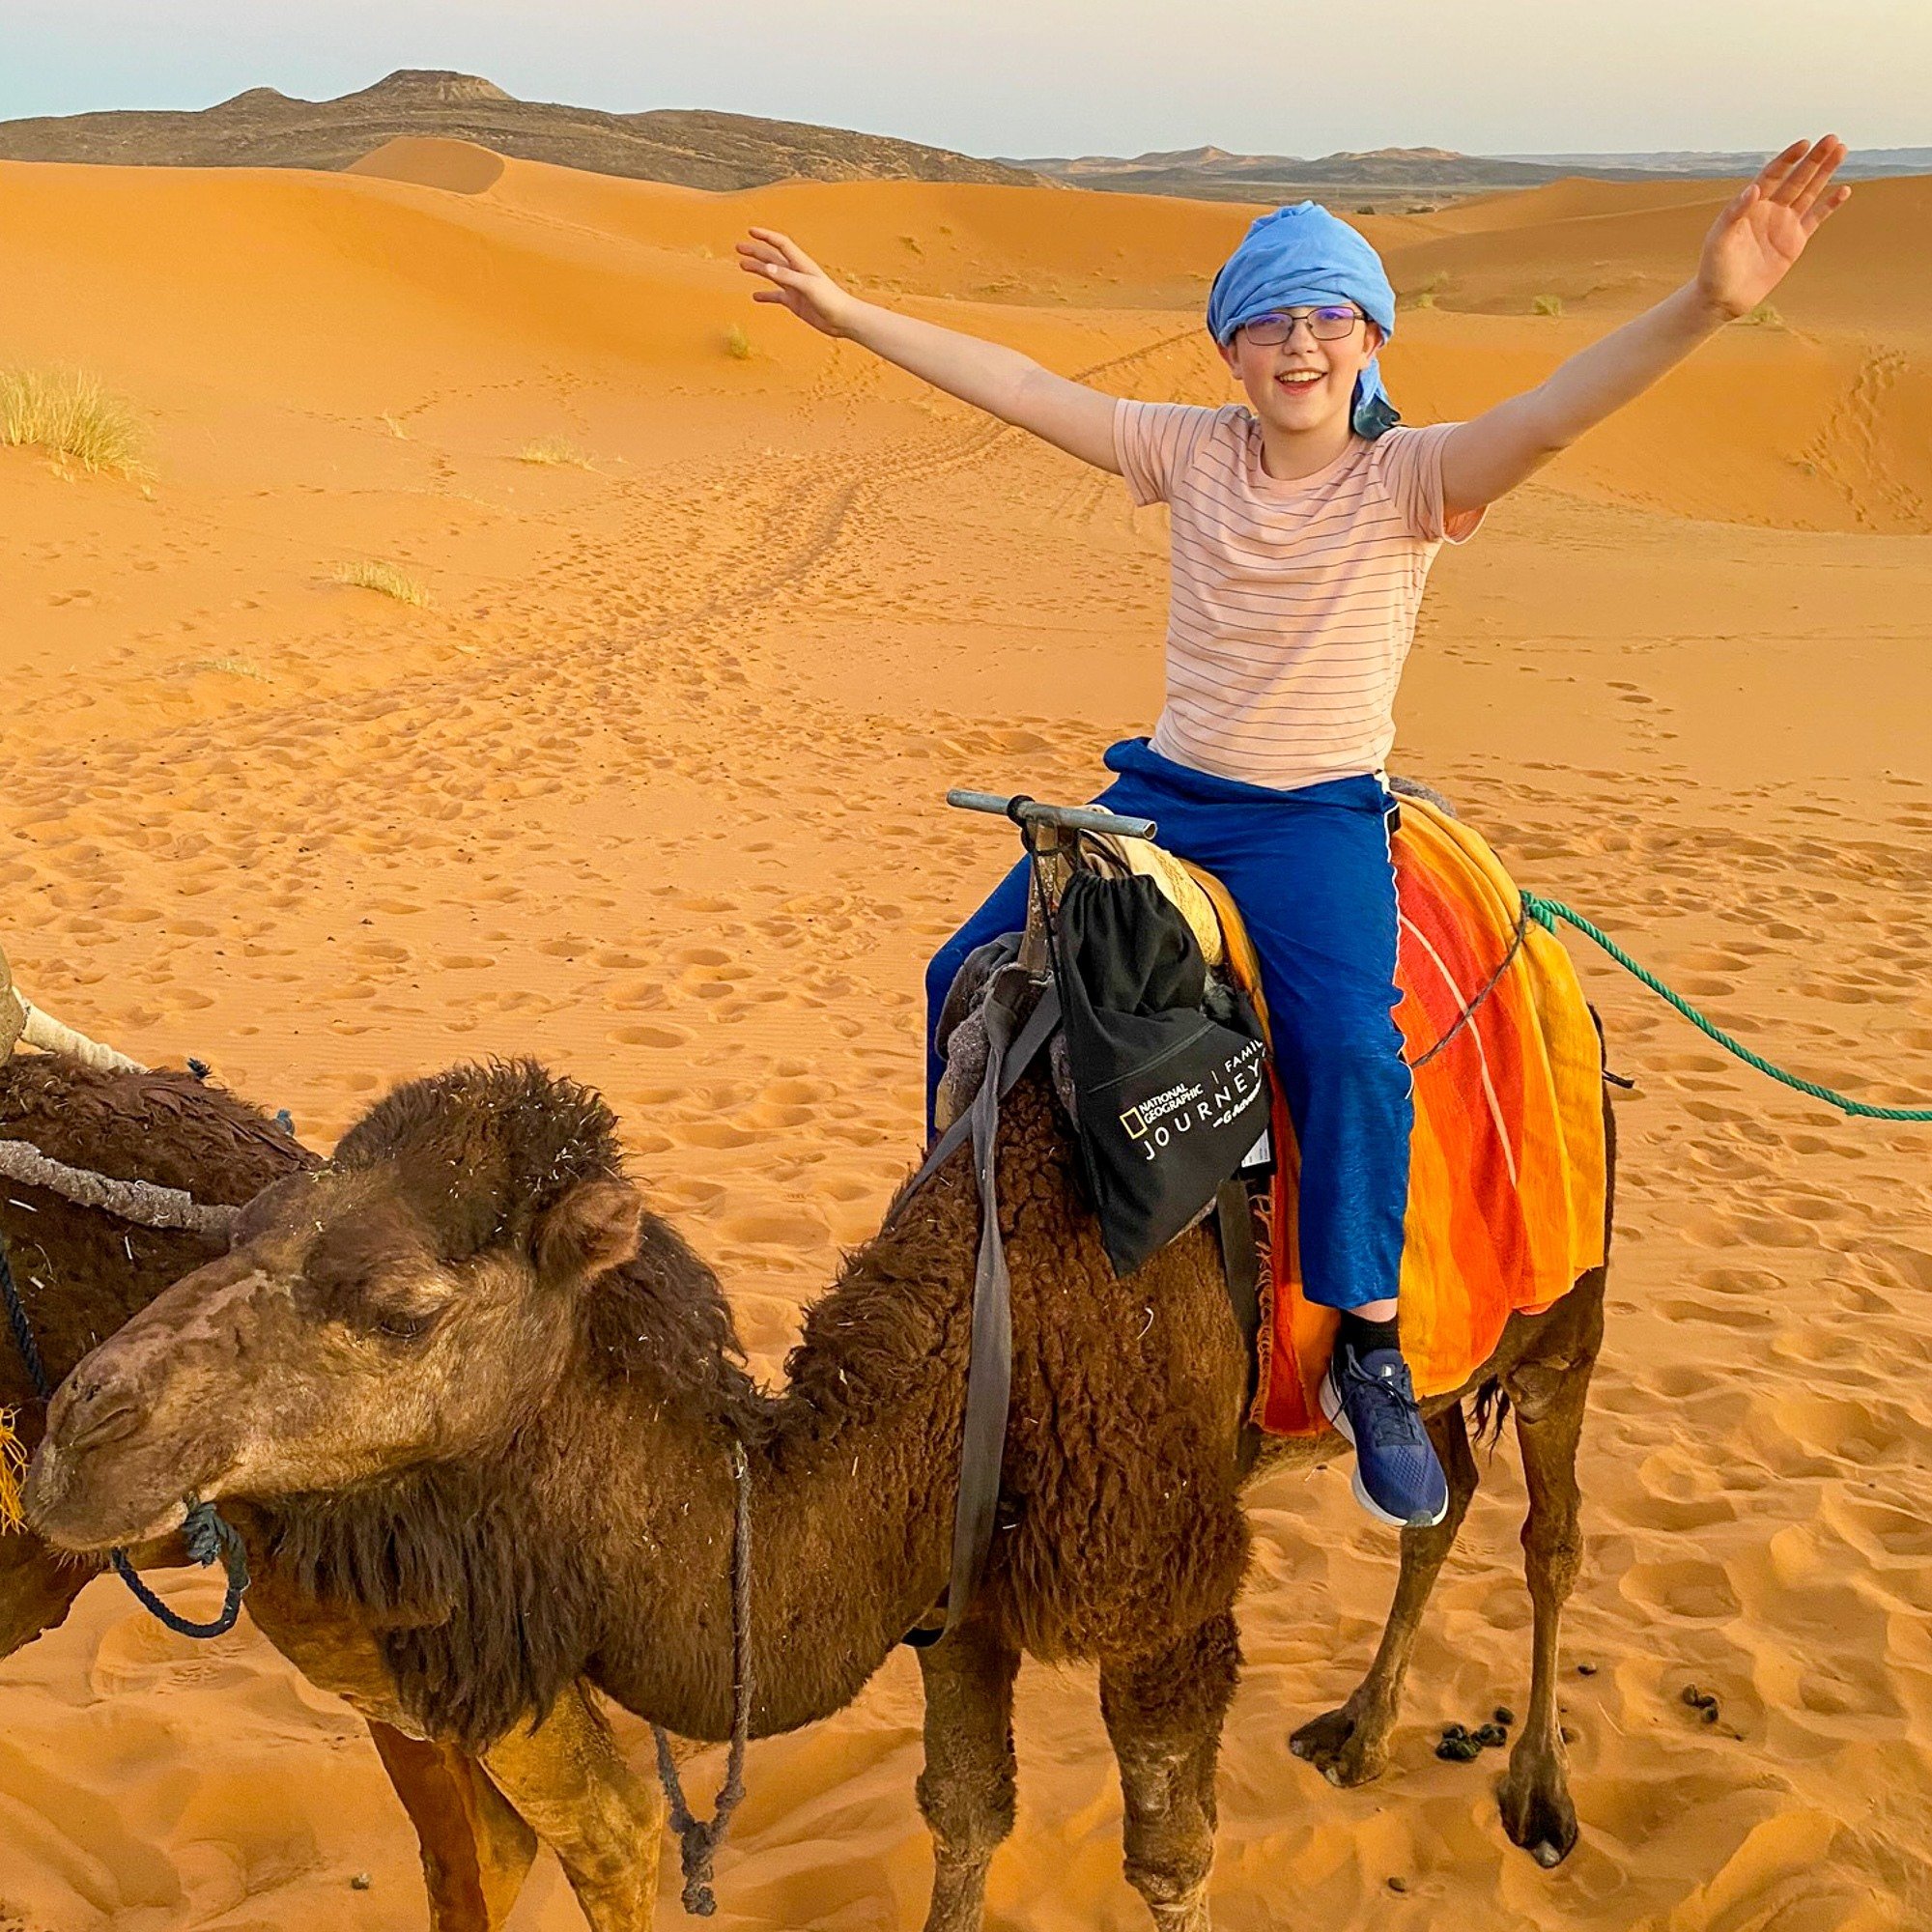 25 Best Things to Do in Morocco with Kids (in 1 Week)